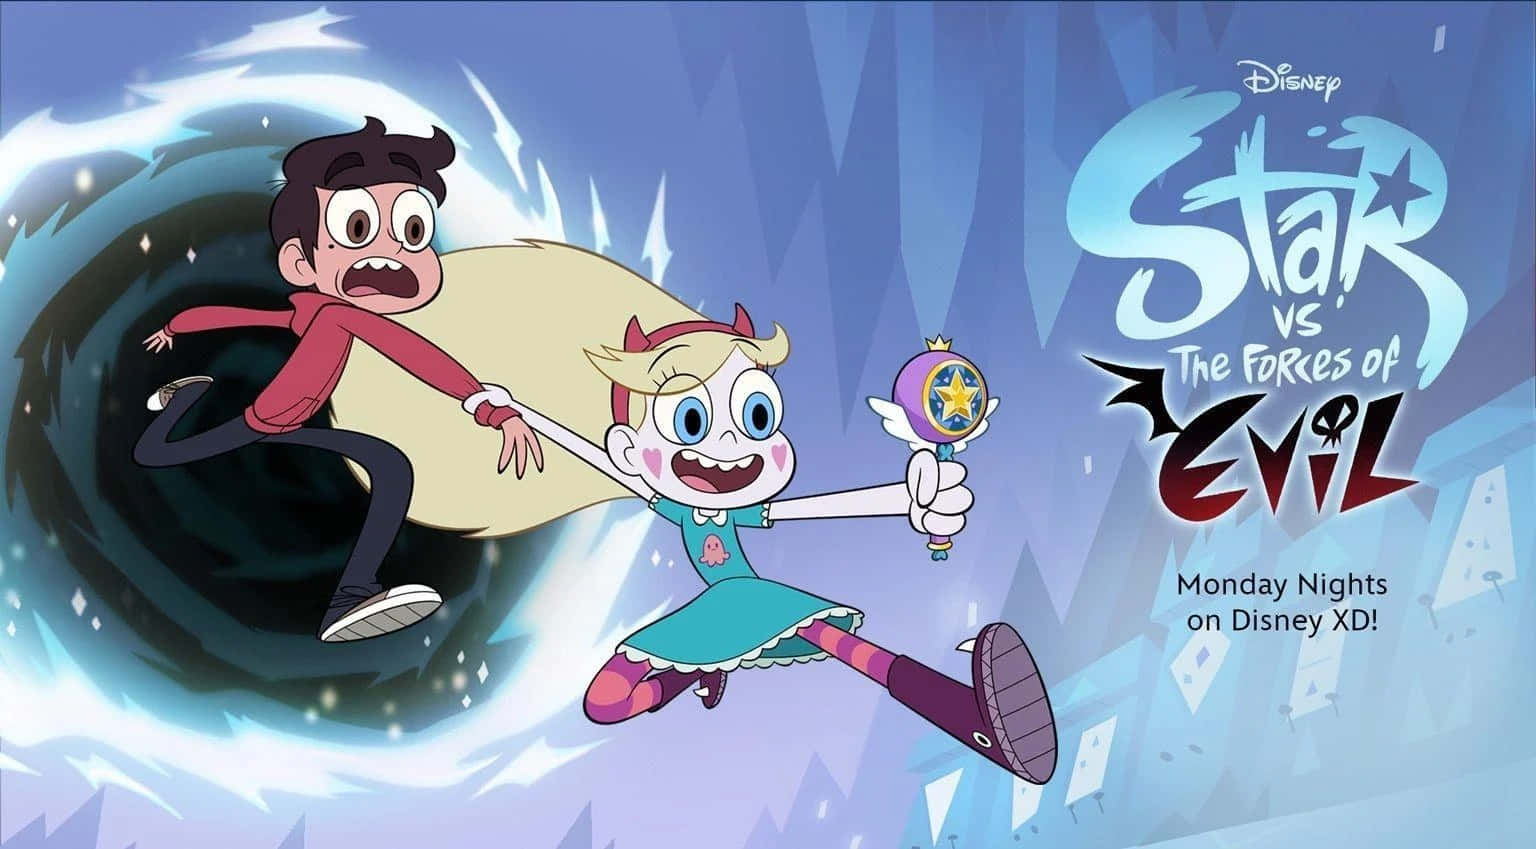 Star Vs The Forces Of Evil - Magical Adventure in a Fantastic World